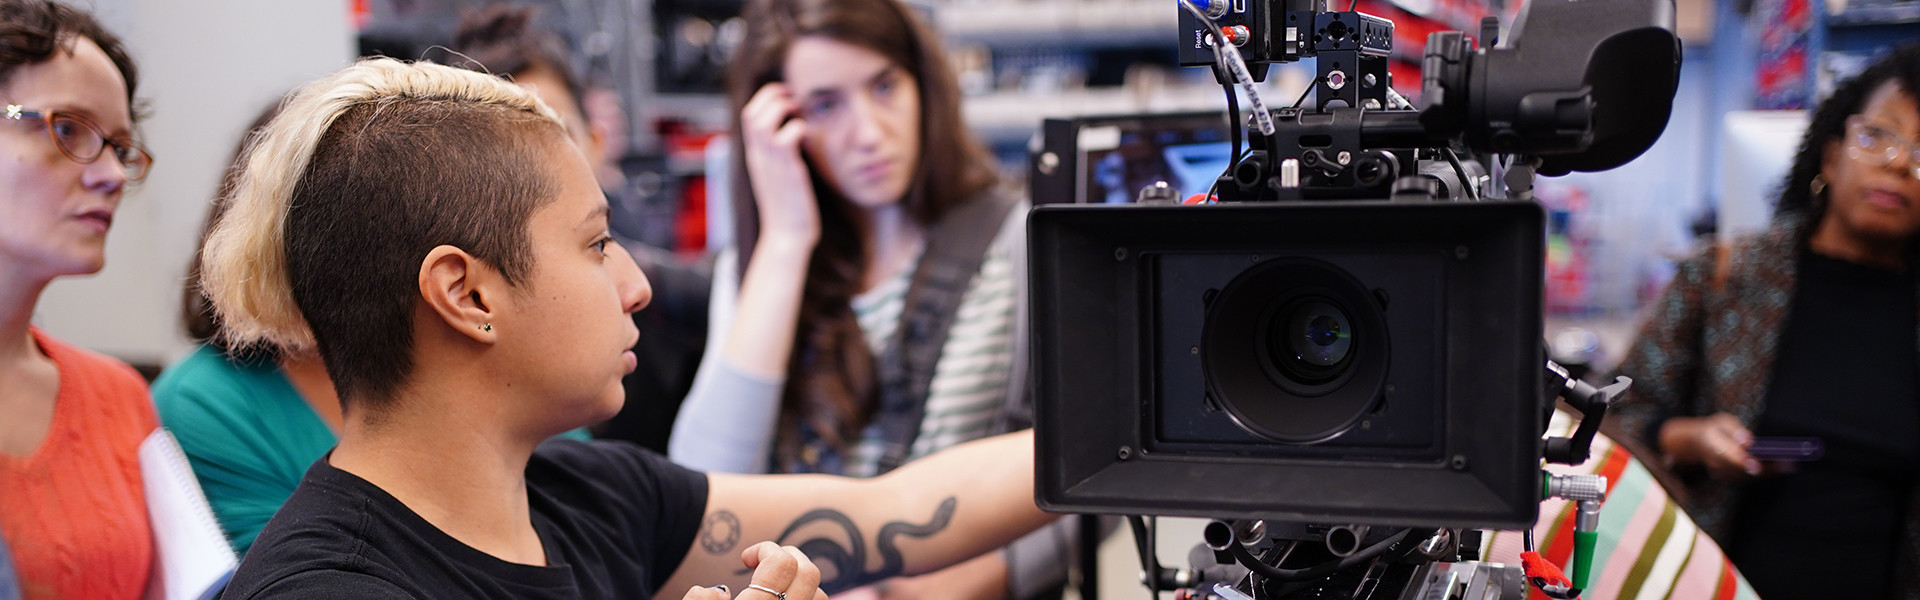 Header image for article Introducing The Cinematographer's Lab by PANO x AbelCine